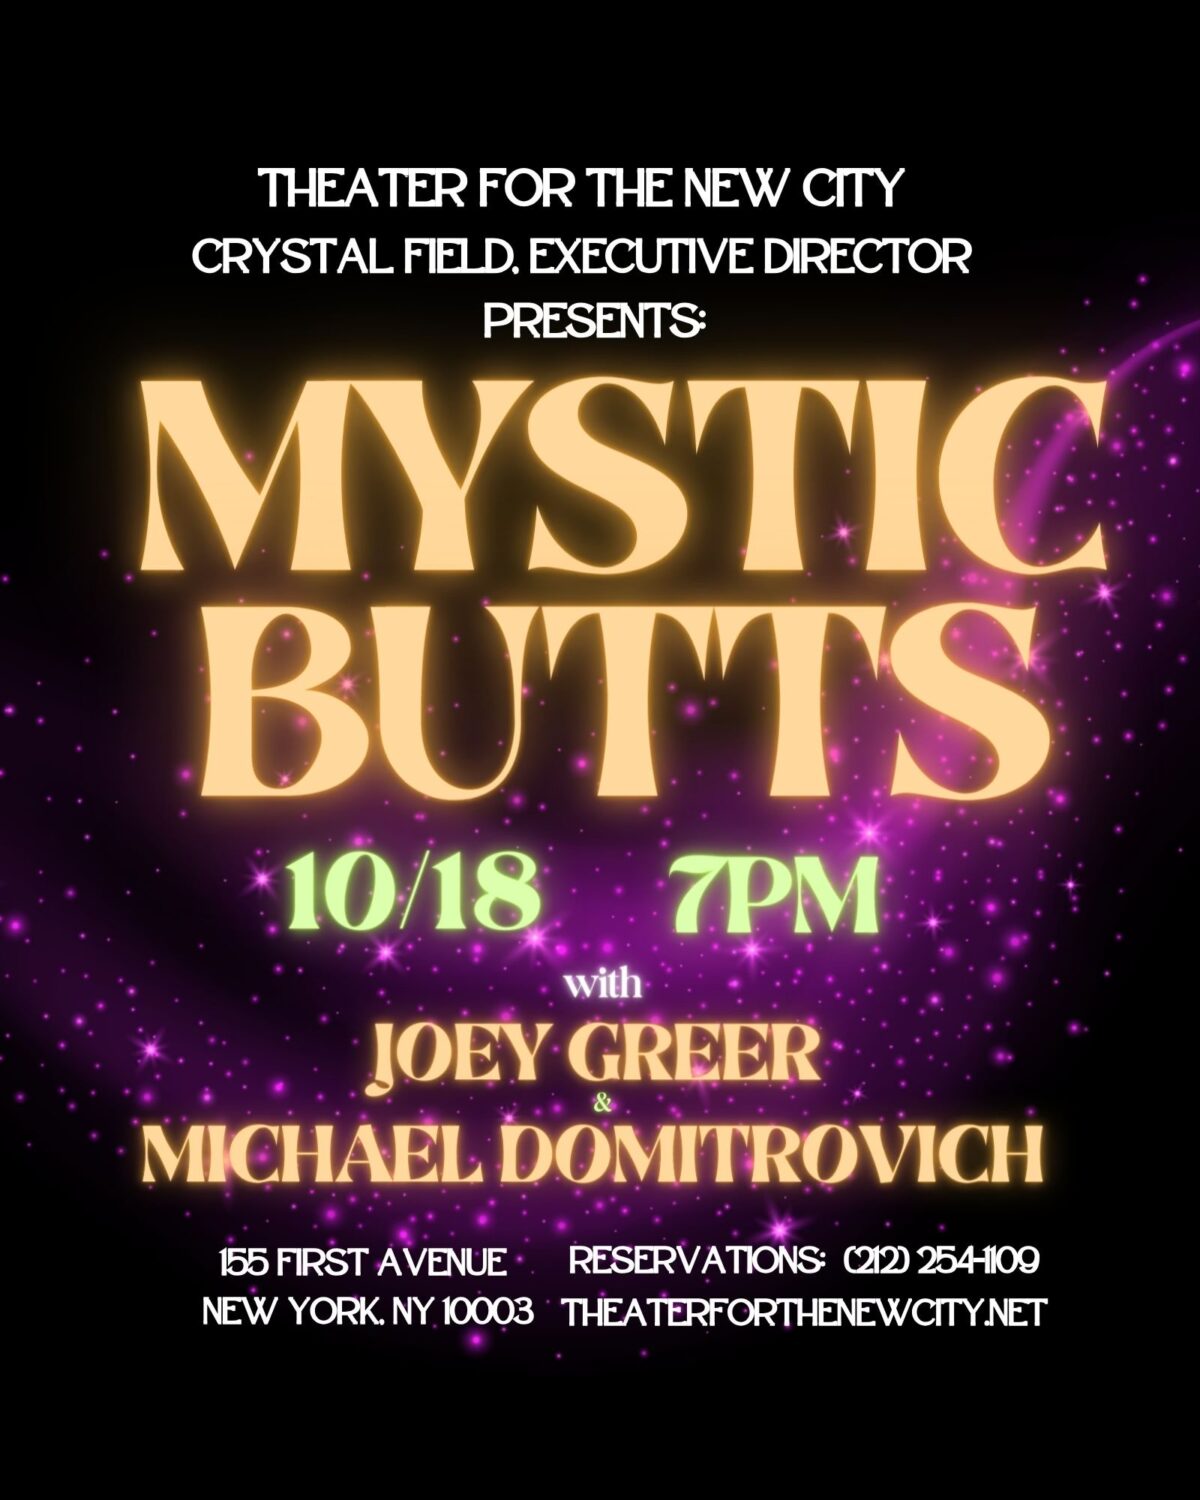 MYSTIC BUTTS – Theater for the New City